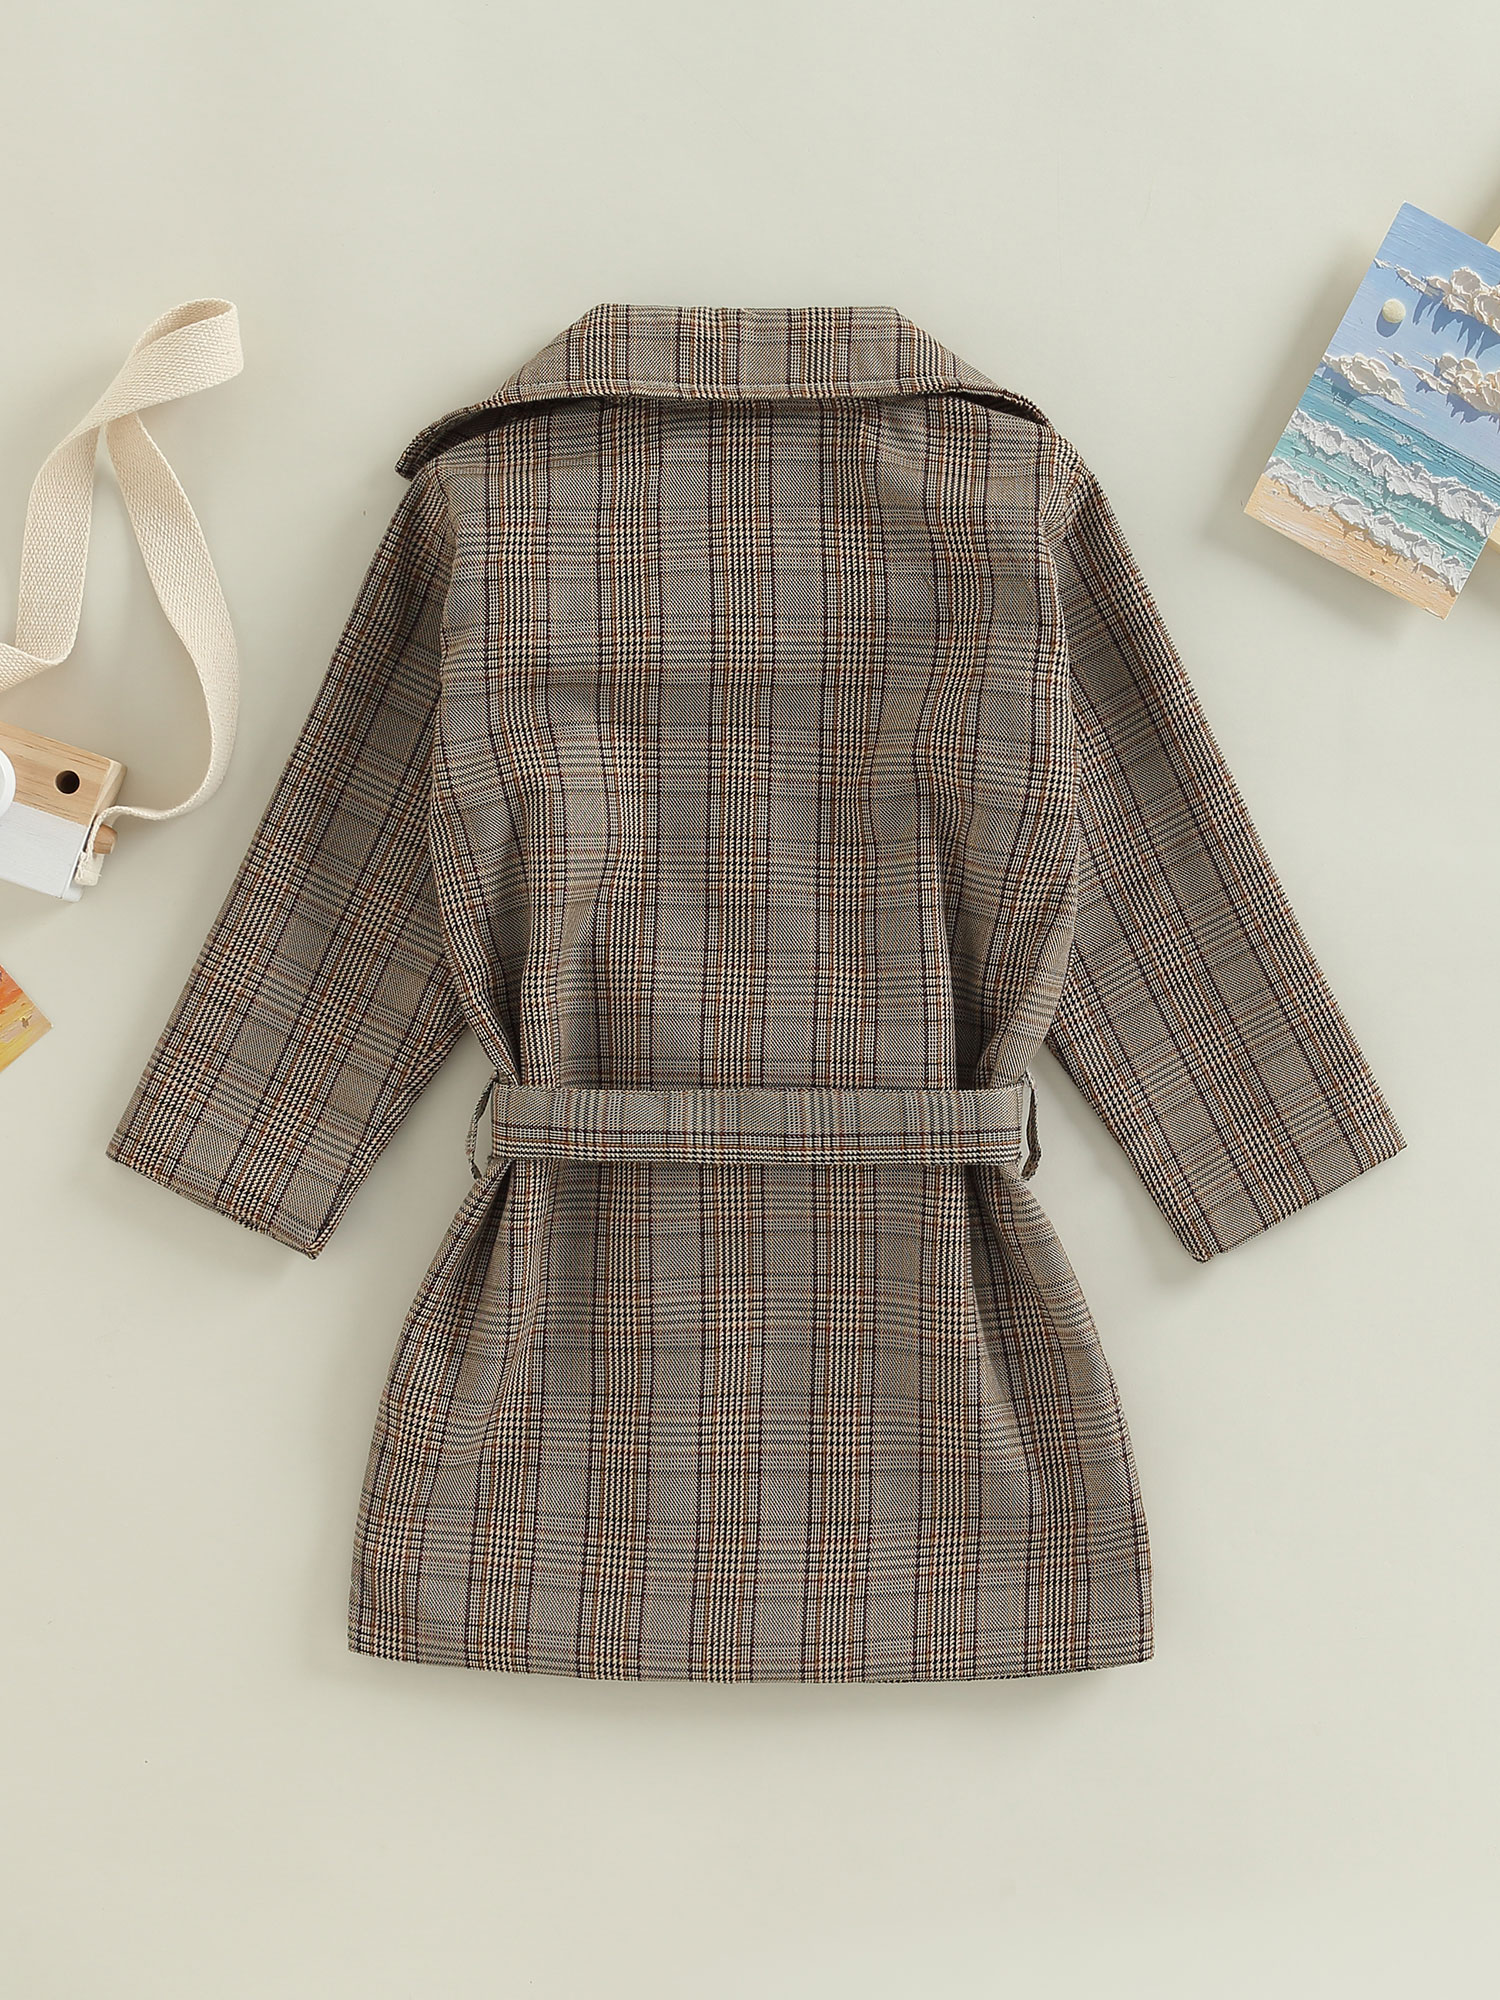 JYYYBF Toddler Baby Girl Trench Coat Long Sleeve Plaid Print Double-Breasted Belted Jacket Lapel Windbreaker Outerwear Grey 4-5 Years - image 5 of 7